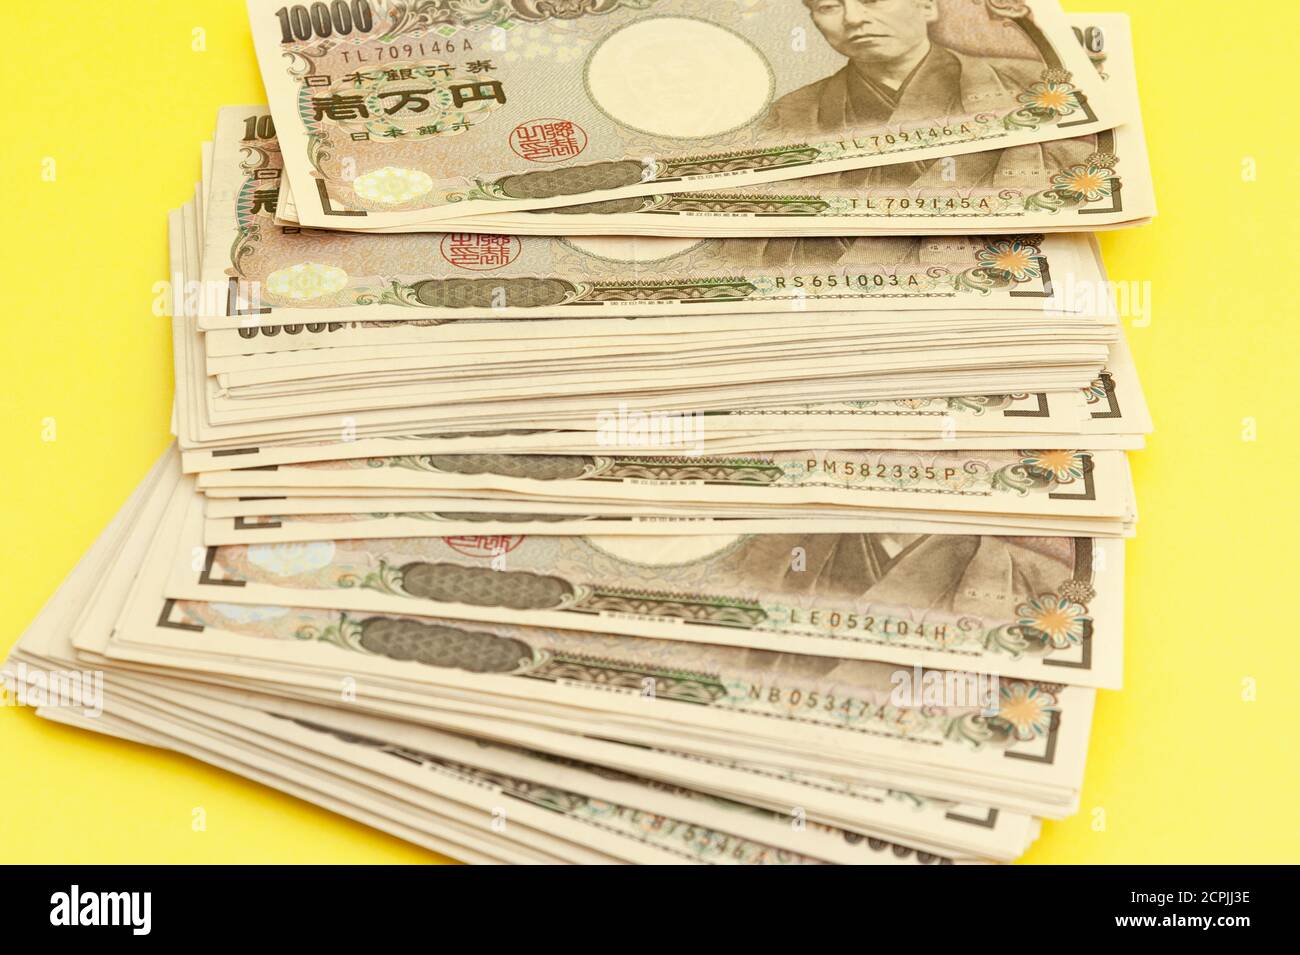 Ten thousand yen (10,000 yen) banknotes stacked. Japanese money. Paper money. Isolated on yellow background. Top view. Close-up. Stock Photo